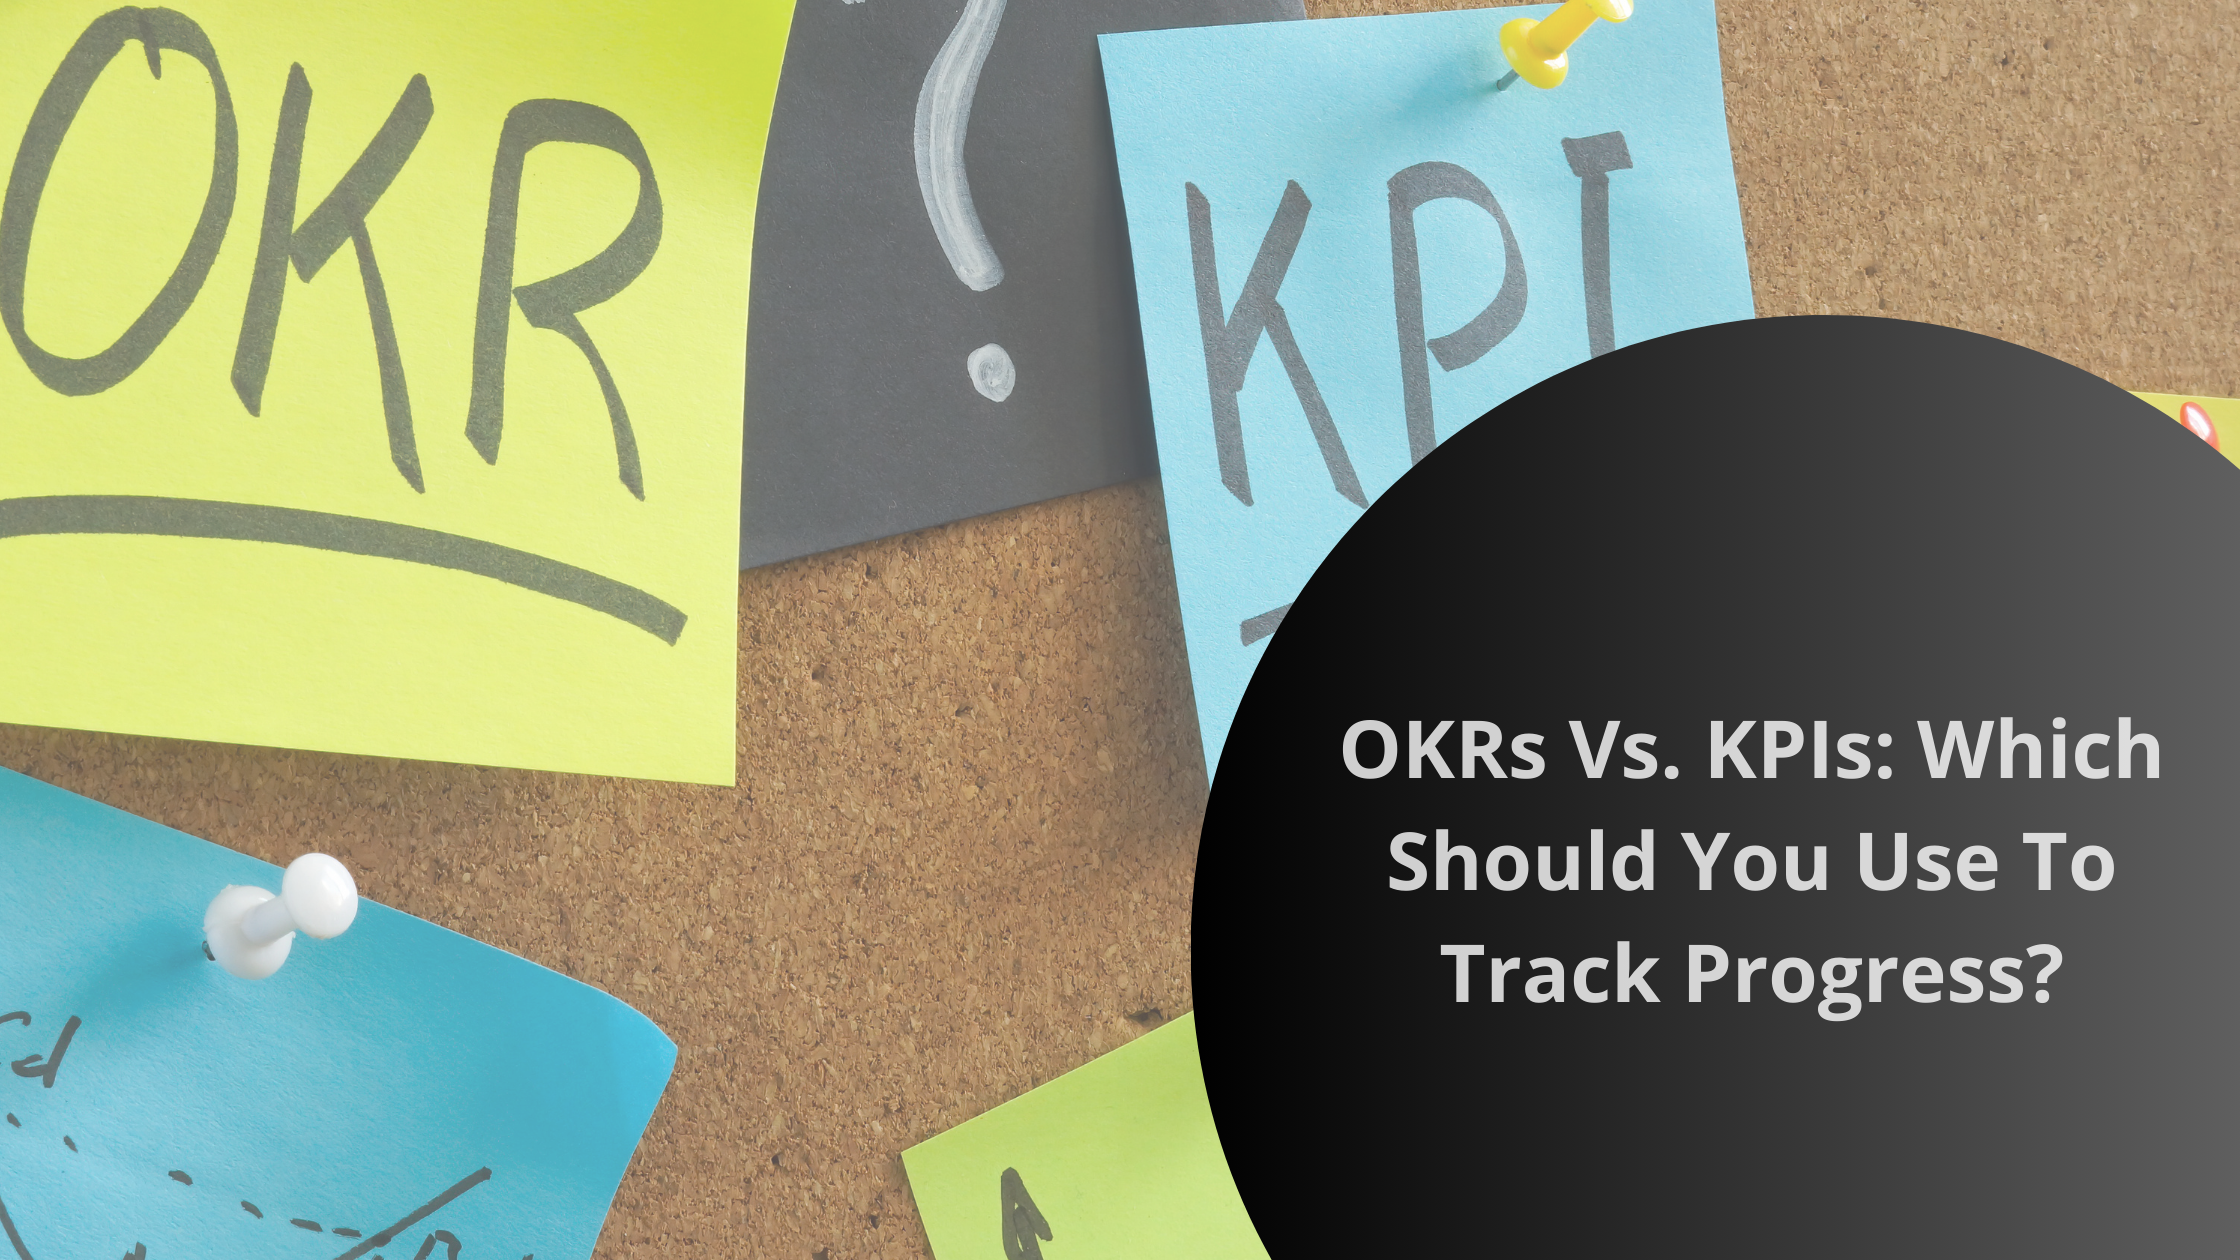 Okrs vs. Kpis: which should you use to track progress? | bookafy